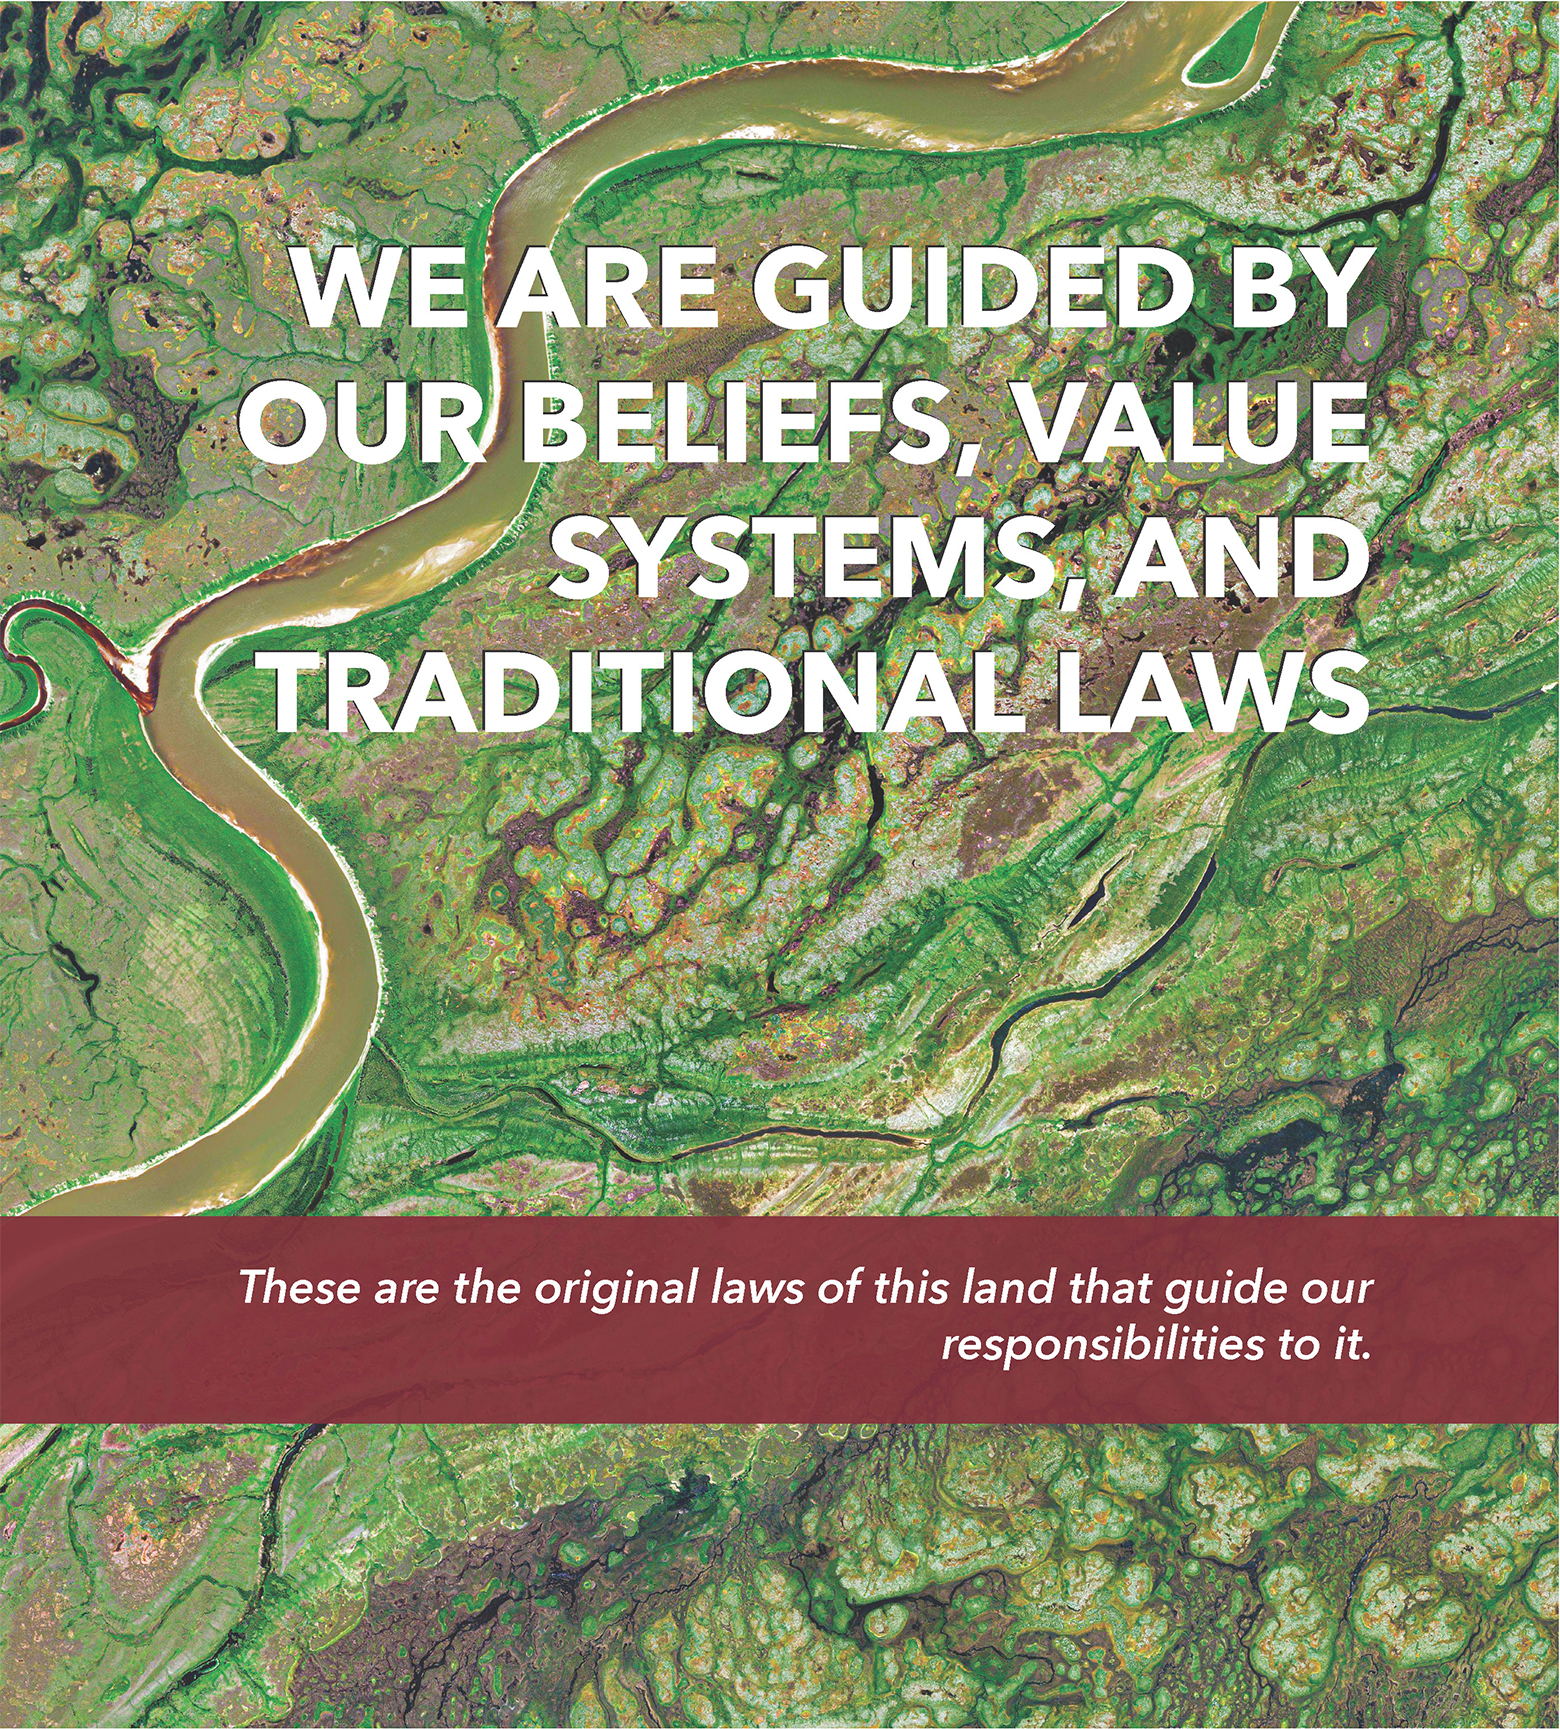 WE ARE GUIDED BY OUR BELIEFS, VALUE SYSTEMS AND TRADITIONAL LAWS